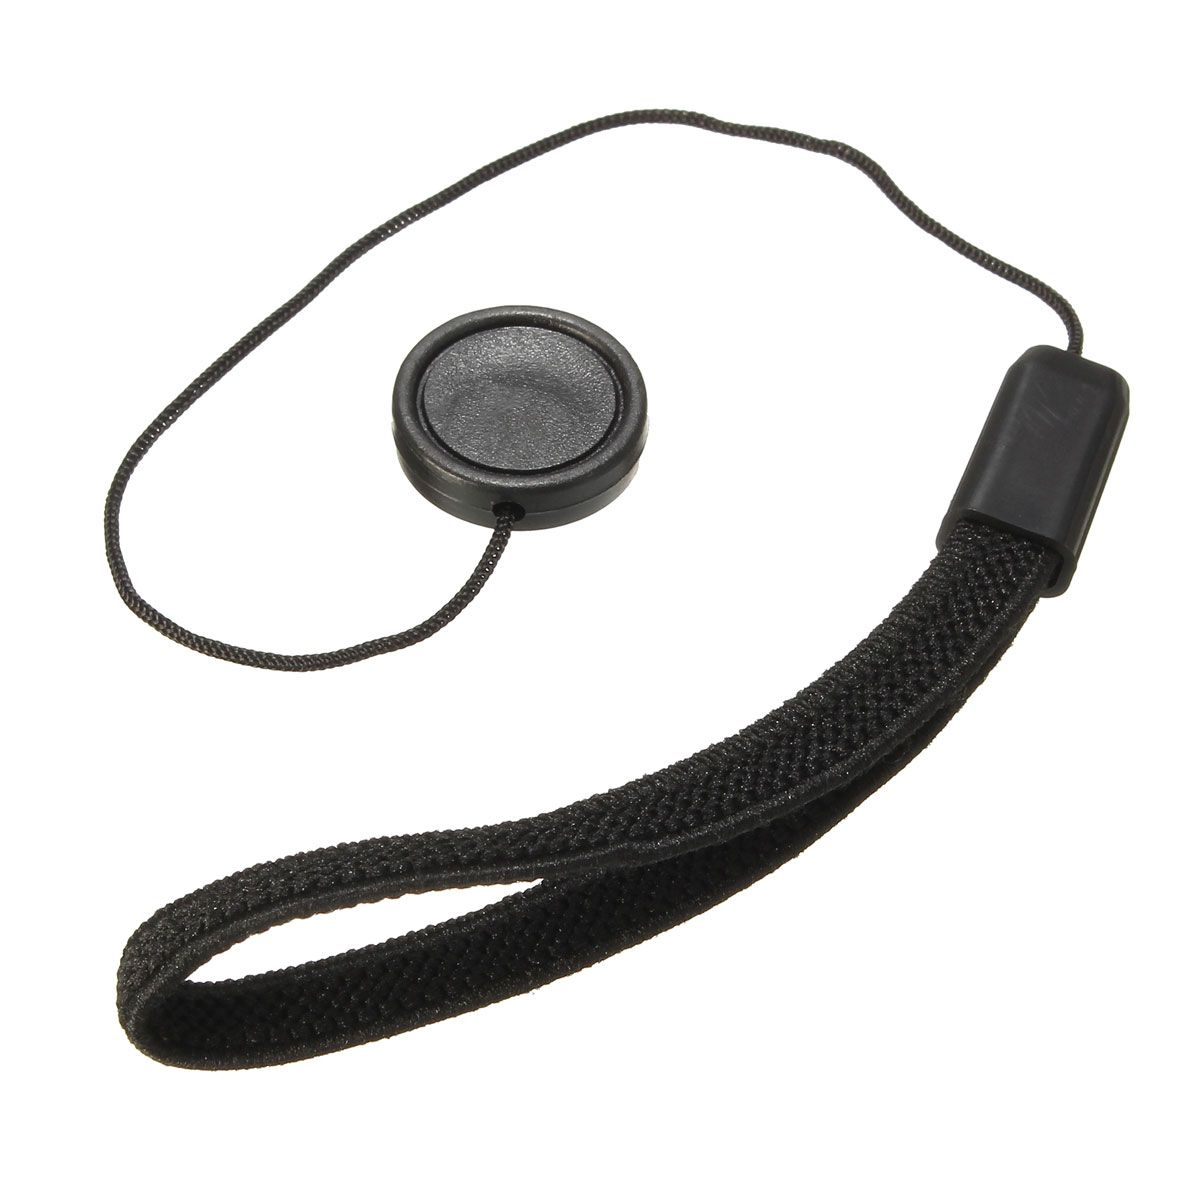 5Pcs-Lens-Cover-Keeper-Holder-Rope-for-Sony-for-Nikon-for-Canon-Camera-1155022